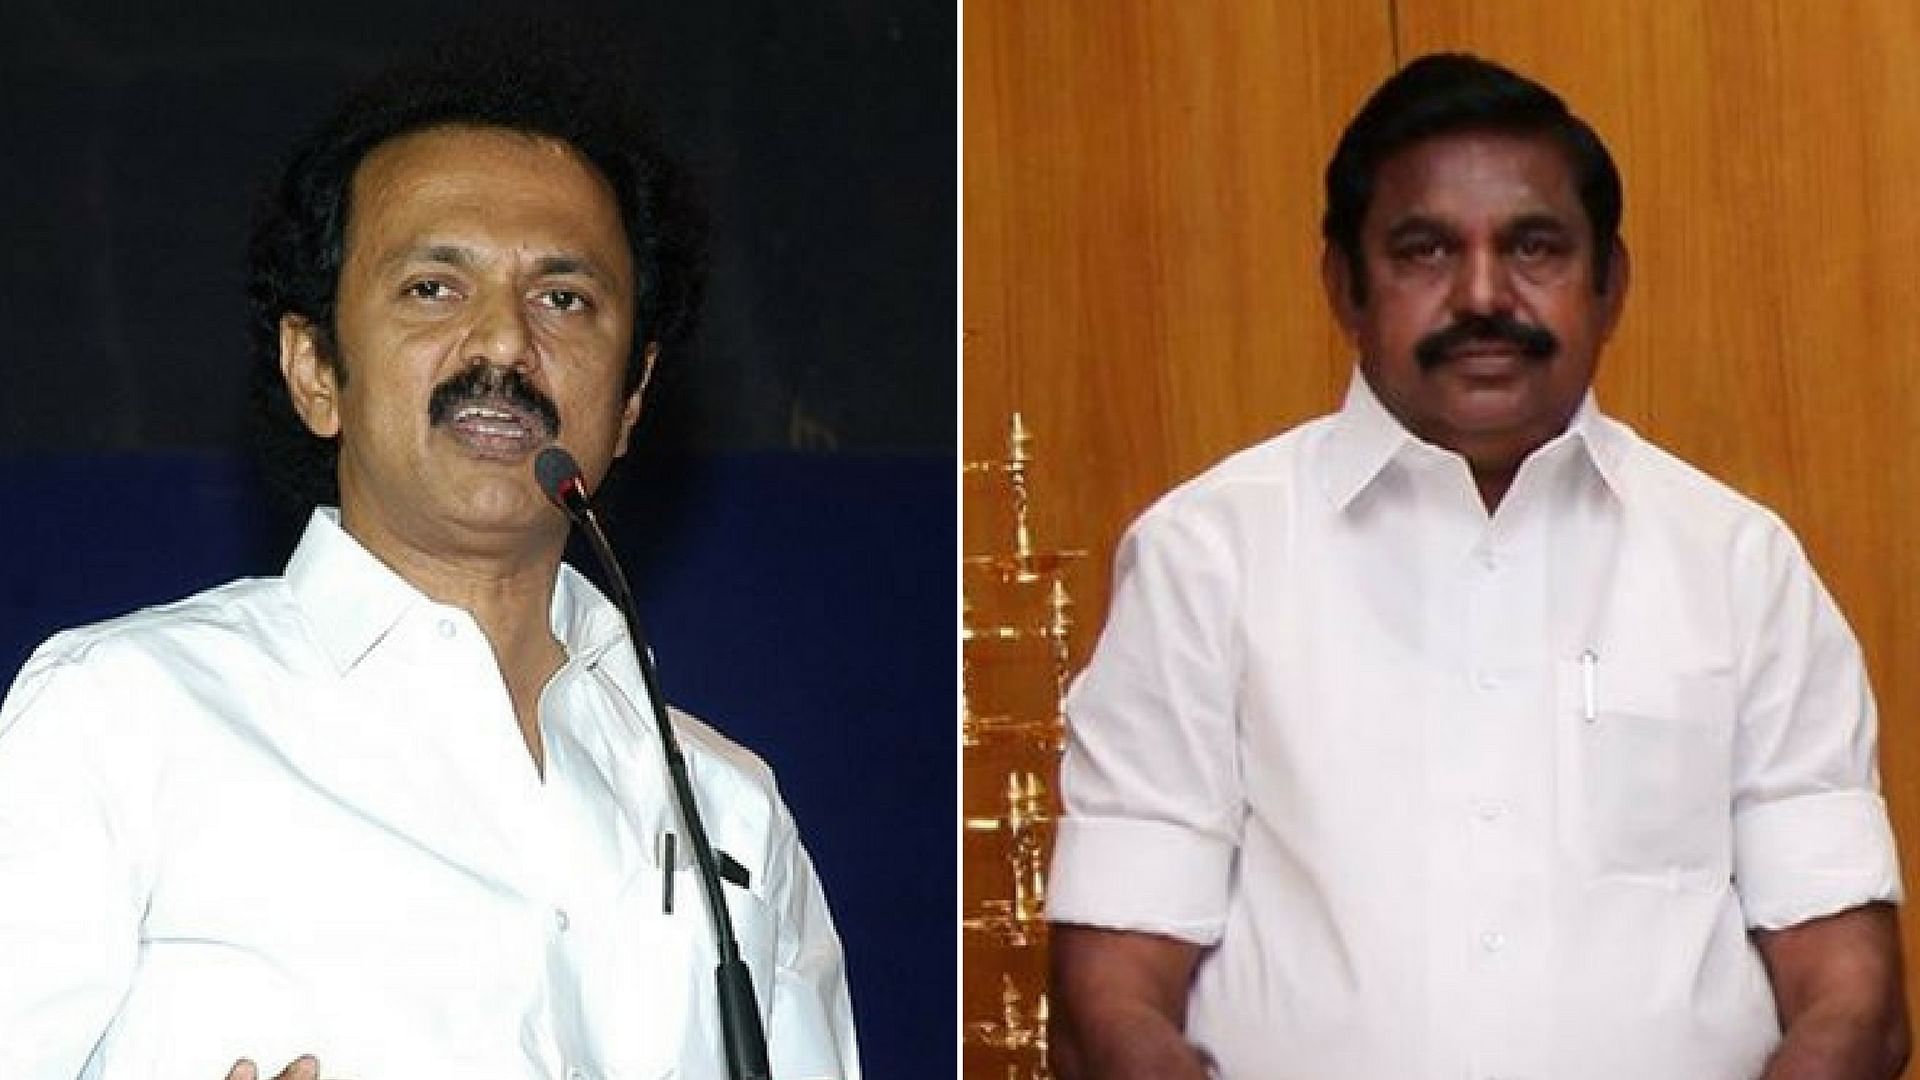 DMK president Stalin hit out at CM for his expectation that the number of new coronavirus cases will come to zero and demanded the state carry out rapid testing besides measures for treatment and rehabilitation.